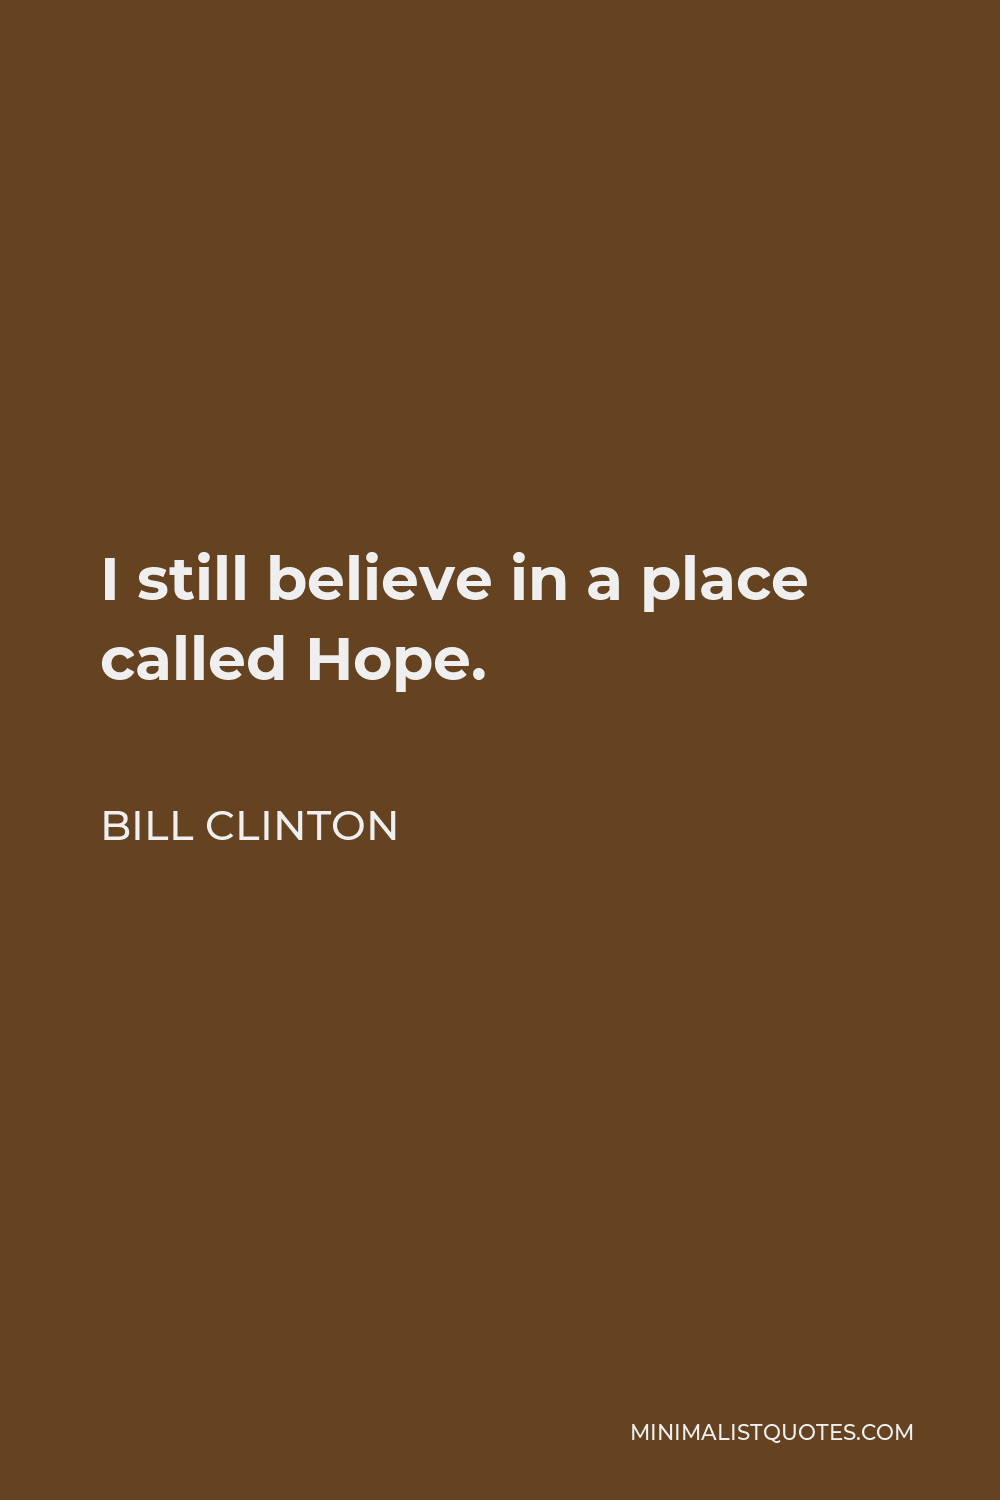 Bill Clinton Quote - I still believe in a place called Hope.